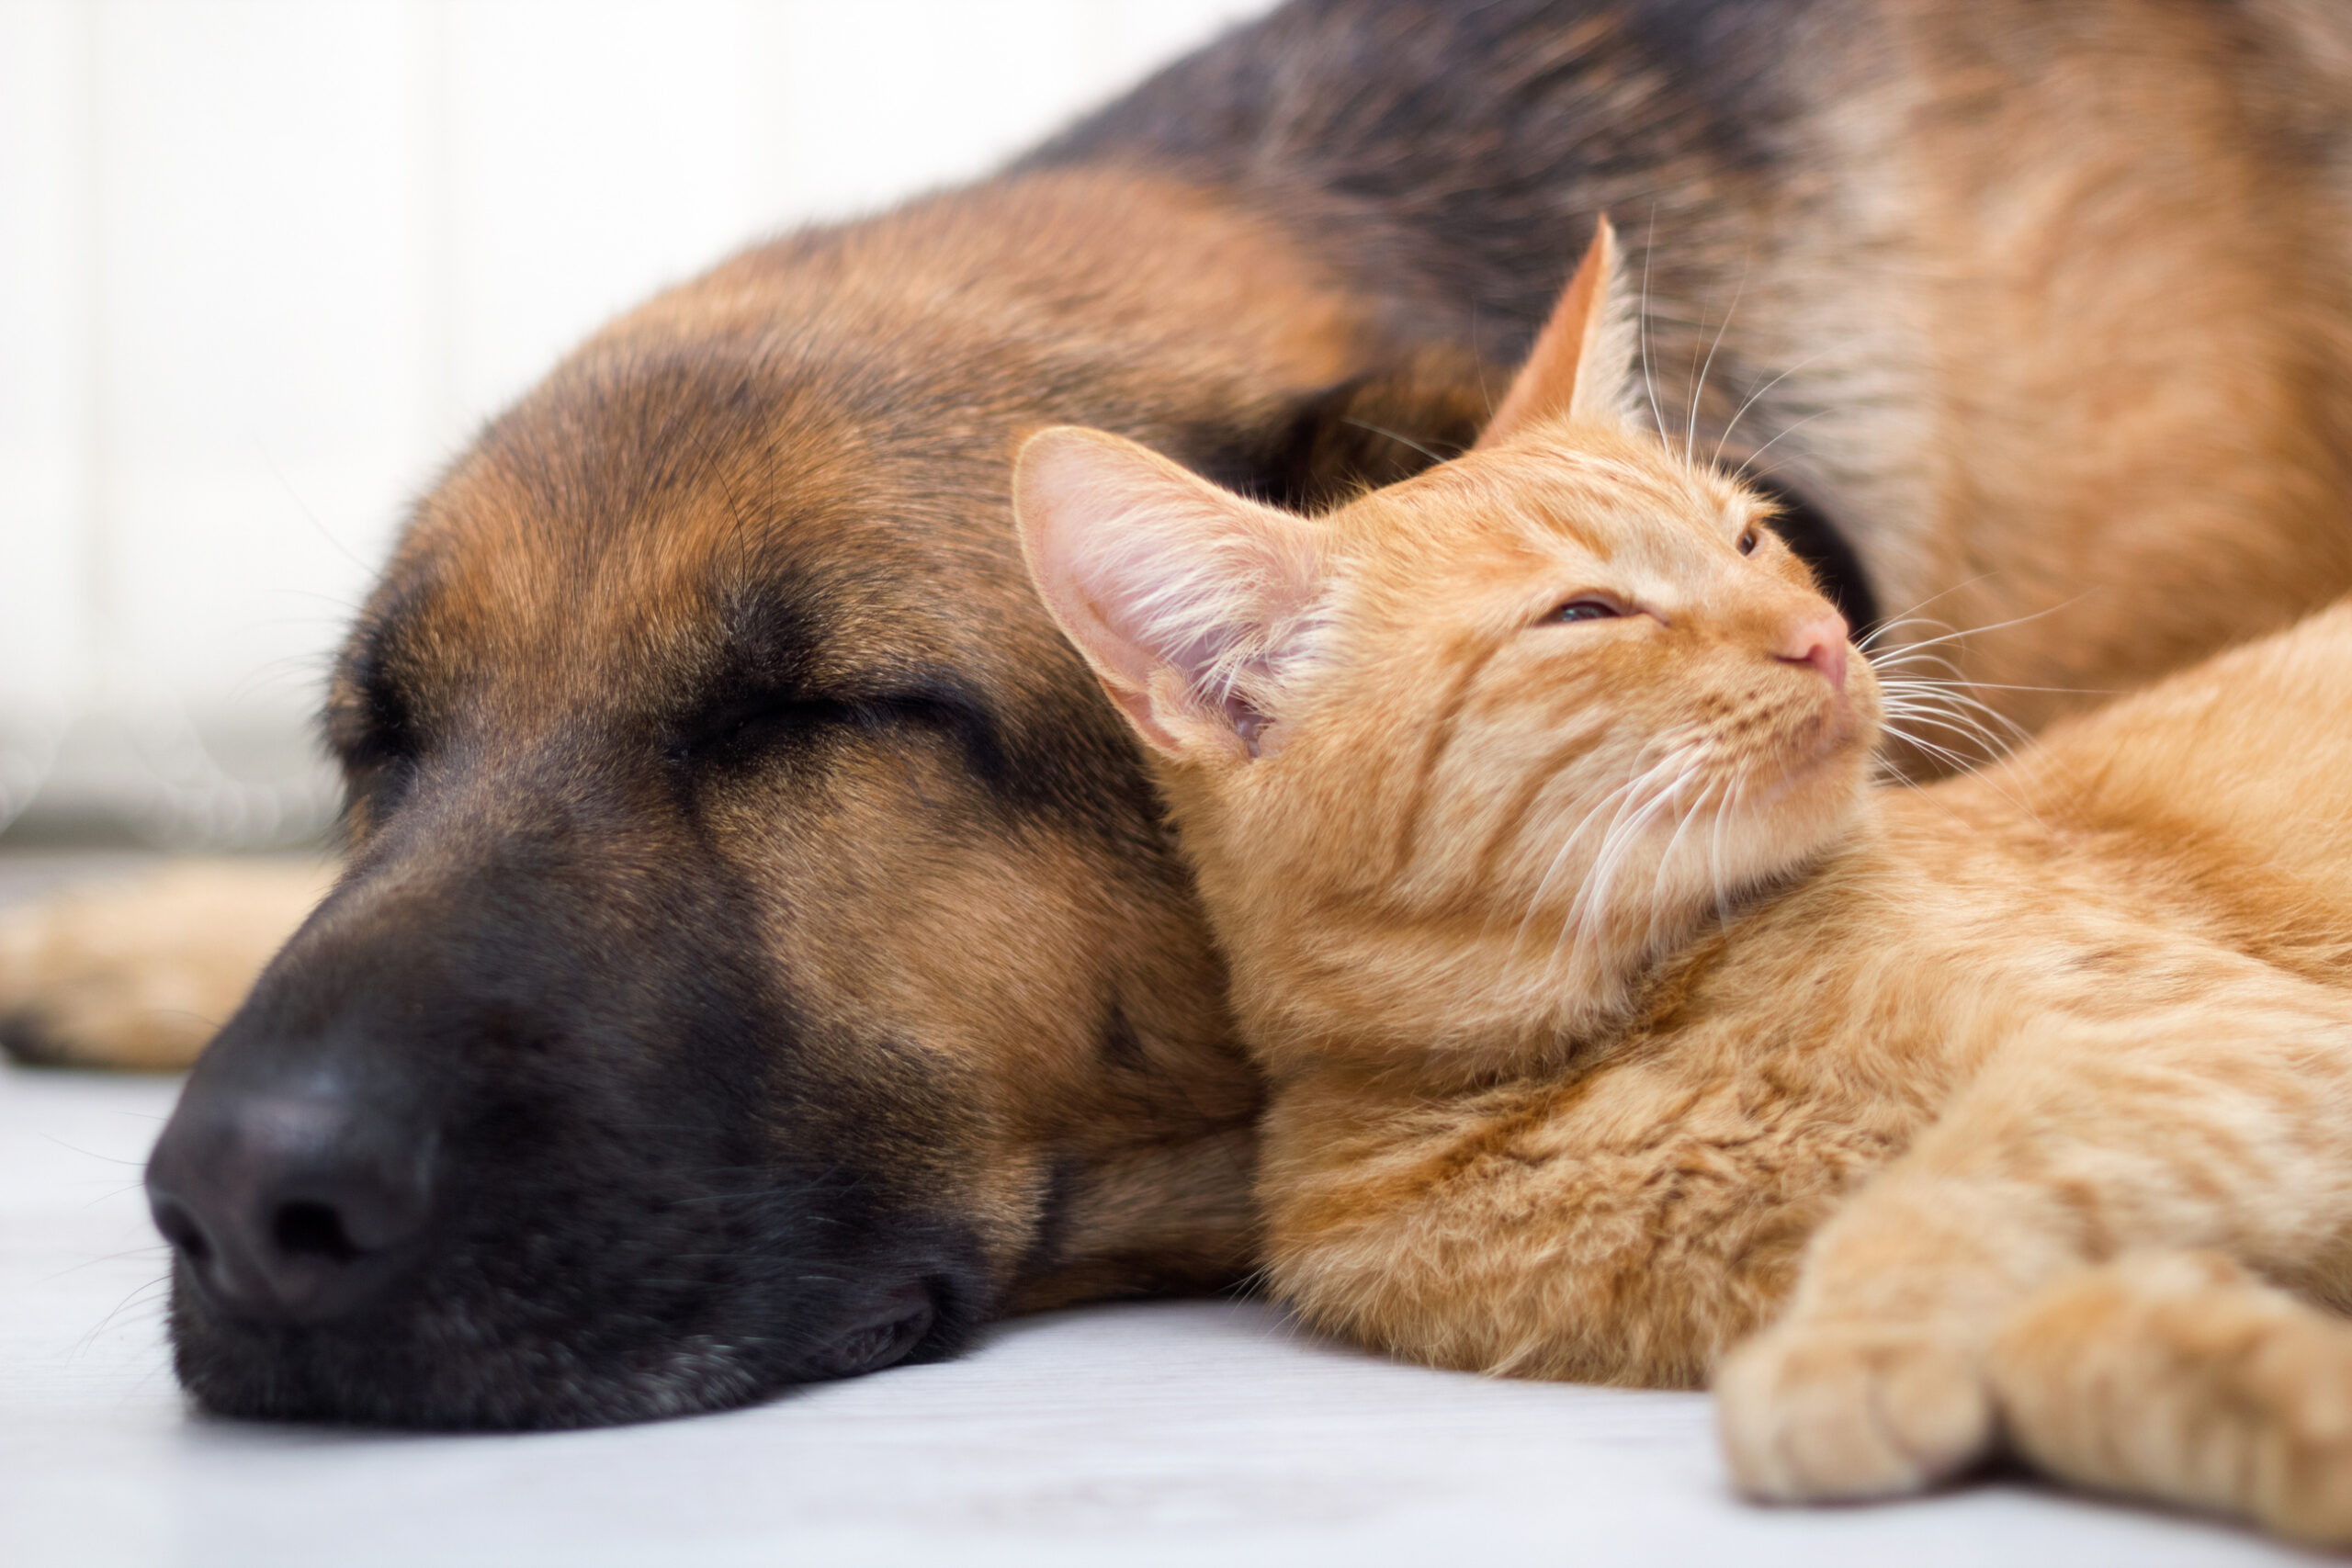 cat-and-dog-sleeping-together